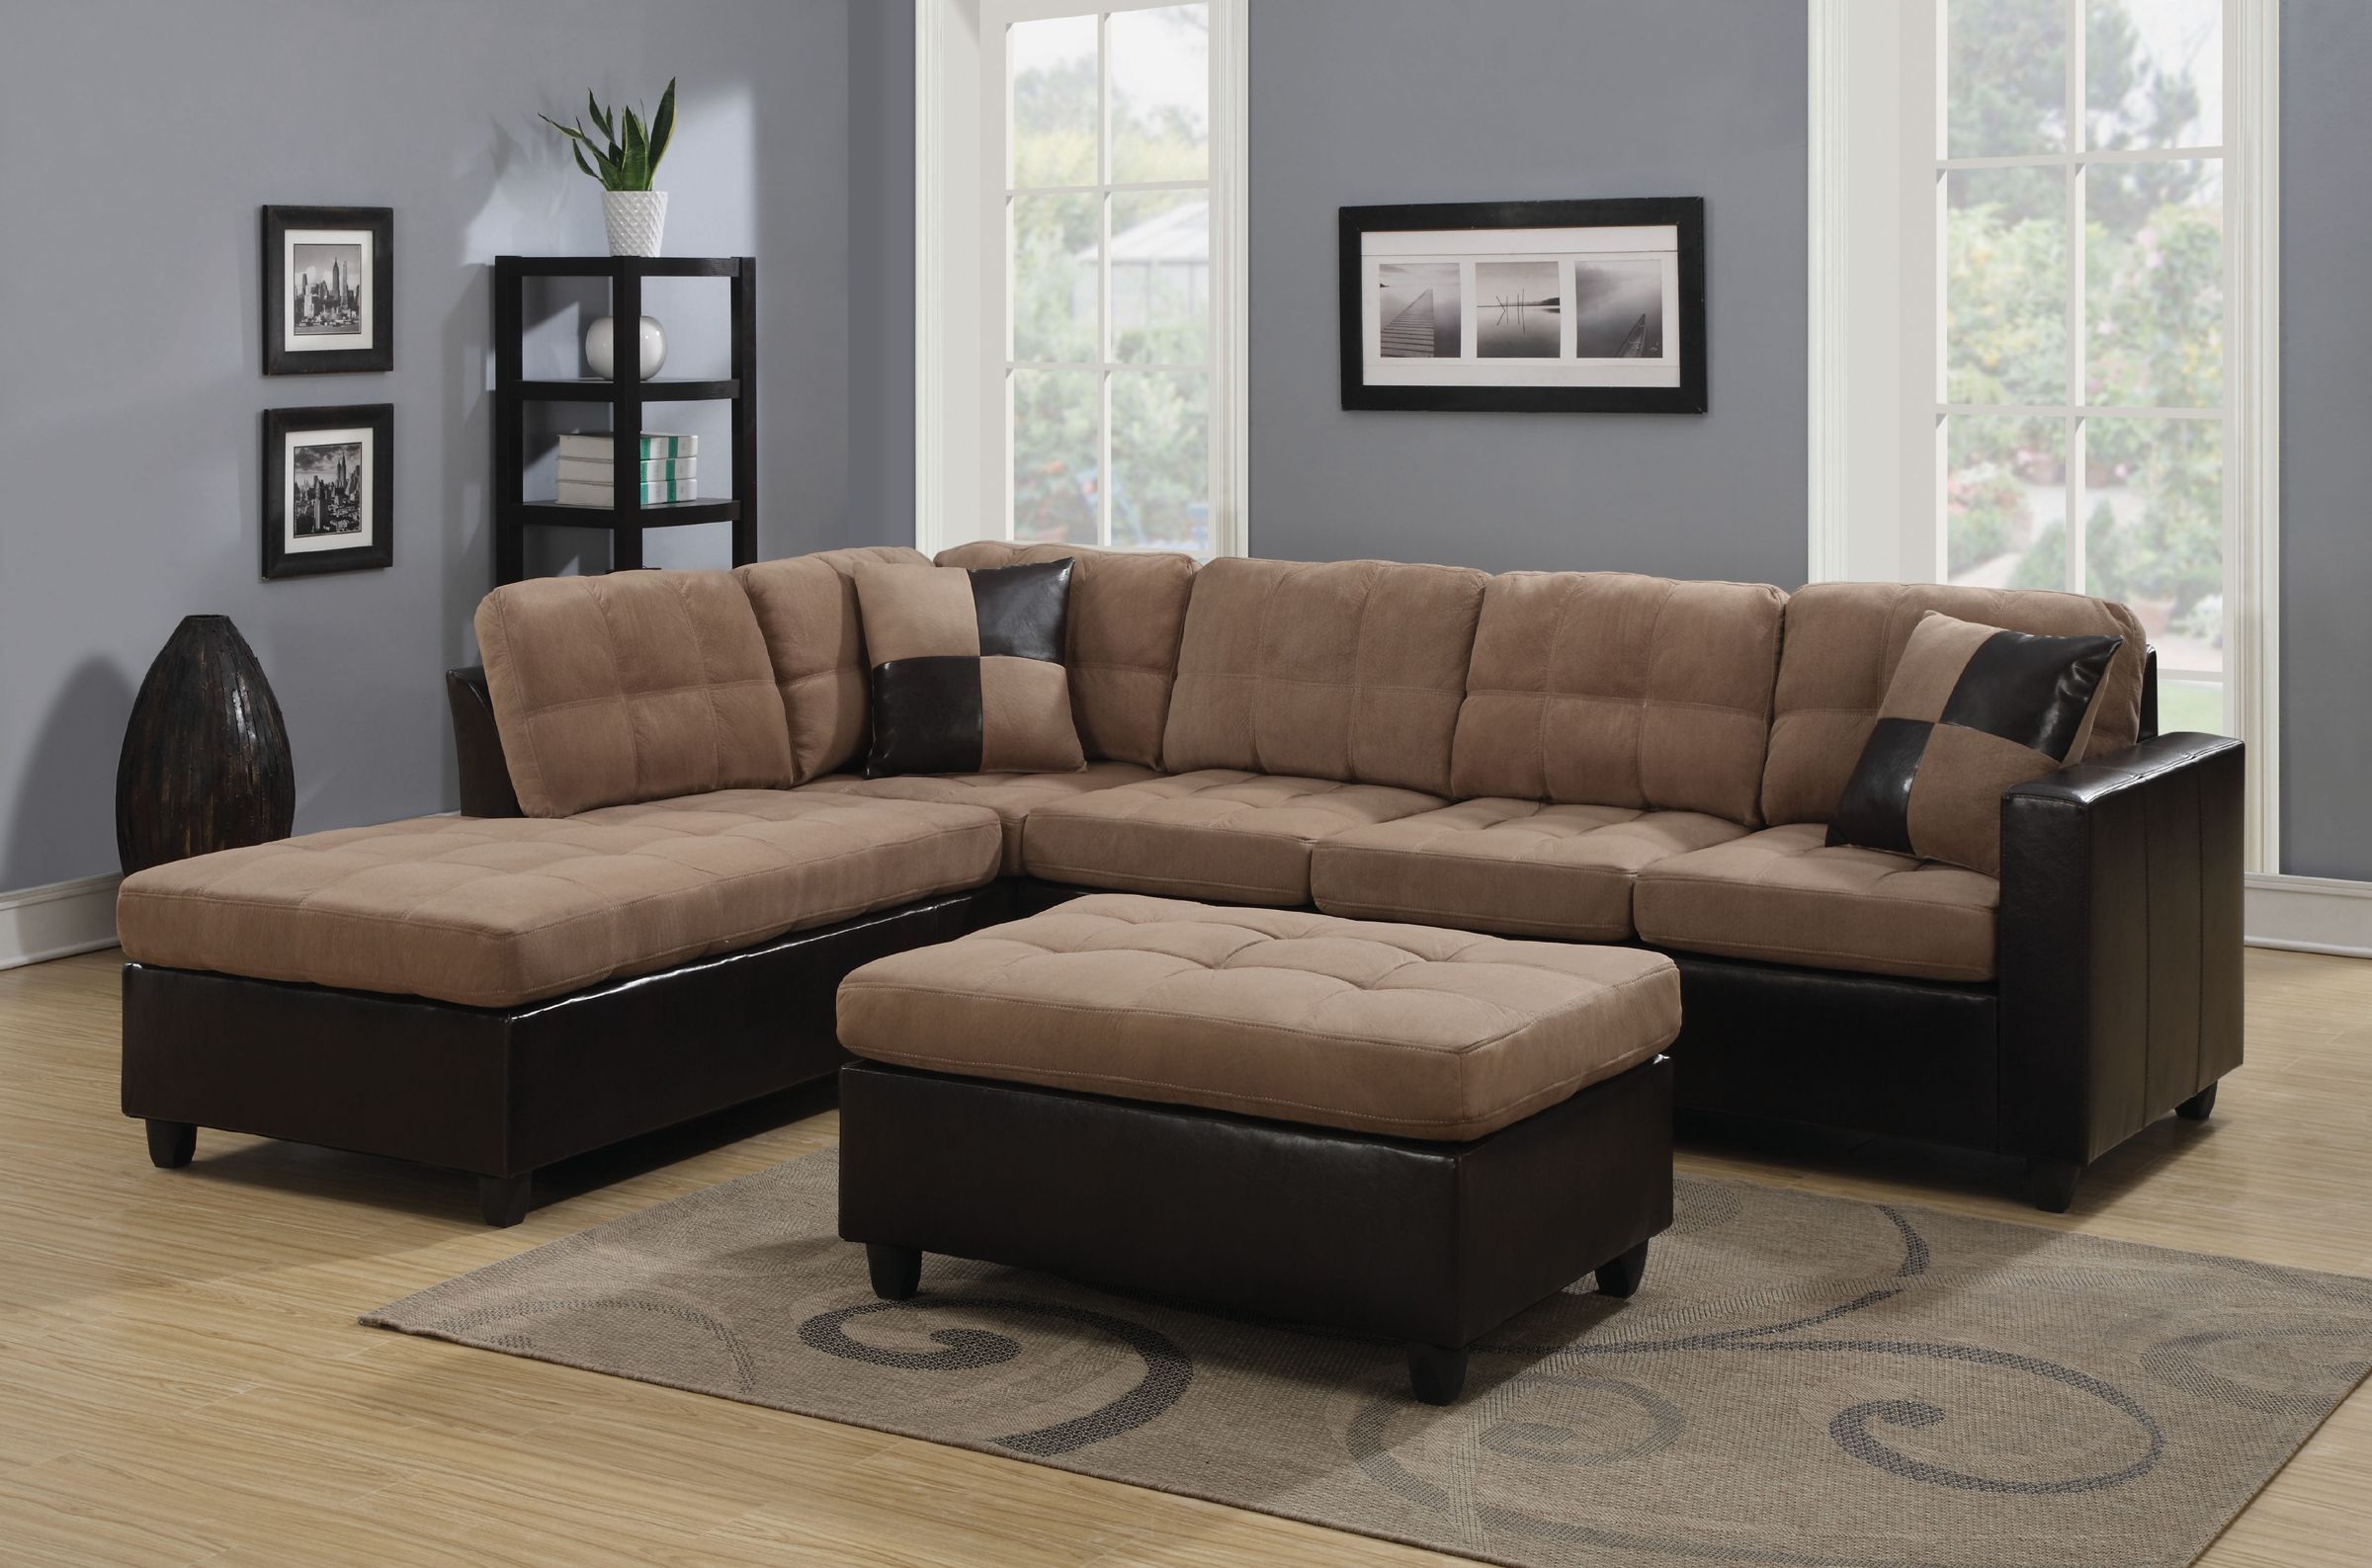 Reversible Tan Microfiber Sectional Sofa With Chaise Set Inside Clifton Reversible Sectional Sofas With Pillows (View 4 of 15)